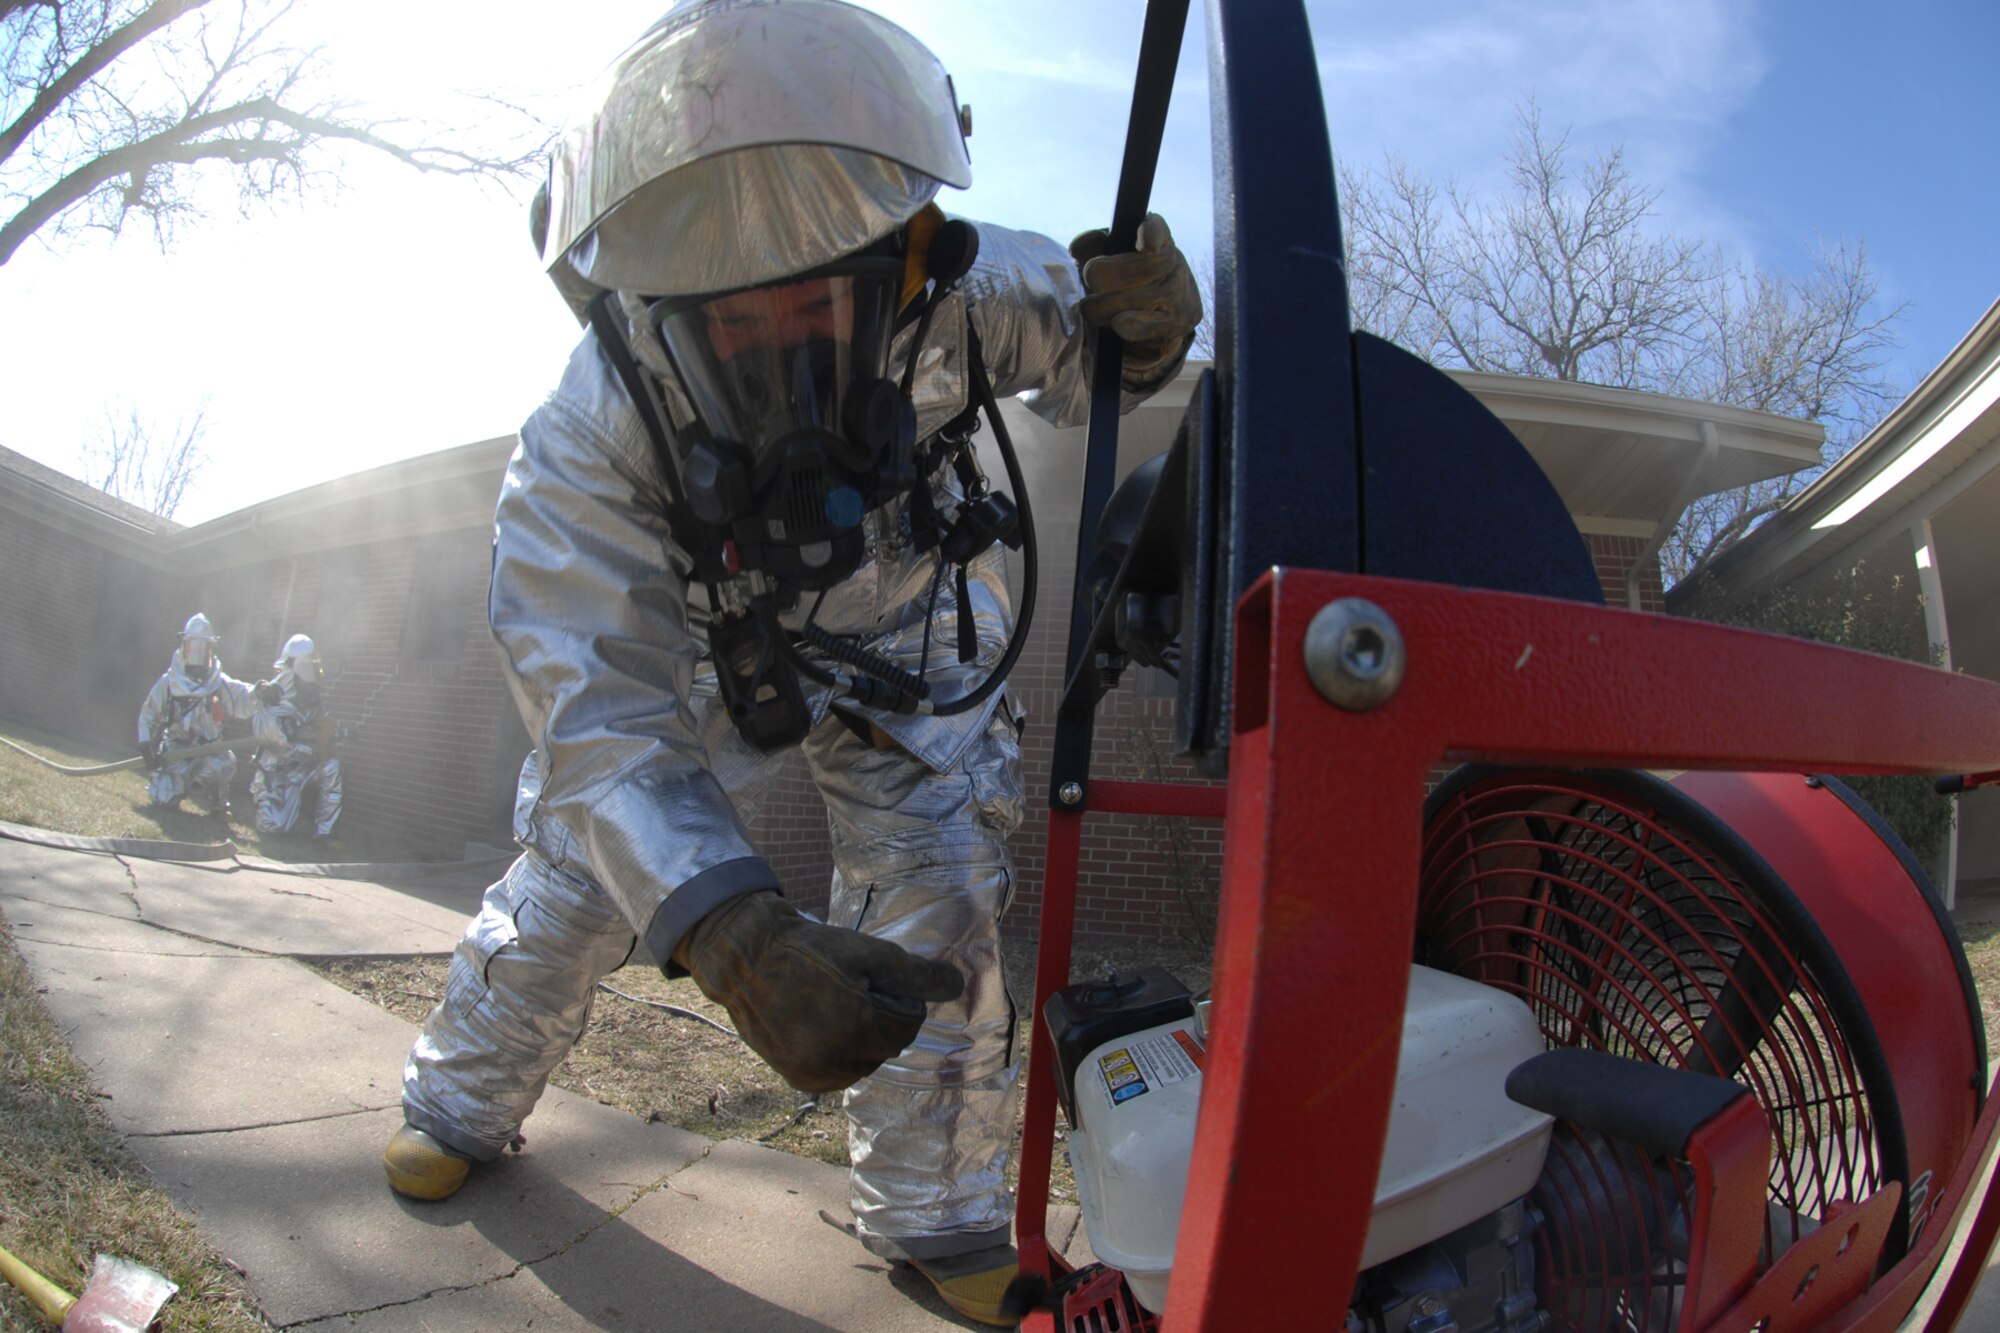 Staff Sgt. John Lane, a 22nd Civil Engineer Squadron firefighter, uses a pressurized fan to clear smoke from a simulated burning building during a unit compliance inspection, Feb. 26, 2010, at McConnell Air Force Base, Kan. A major command UCI occurs about every four years at McConnell to evaluate how the 22nd Air Refueling Wing accomplishes its mission. (U.S. Air Force photo/Staff Sgt. Jamie Train)